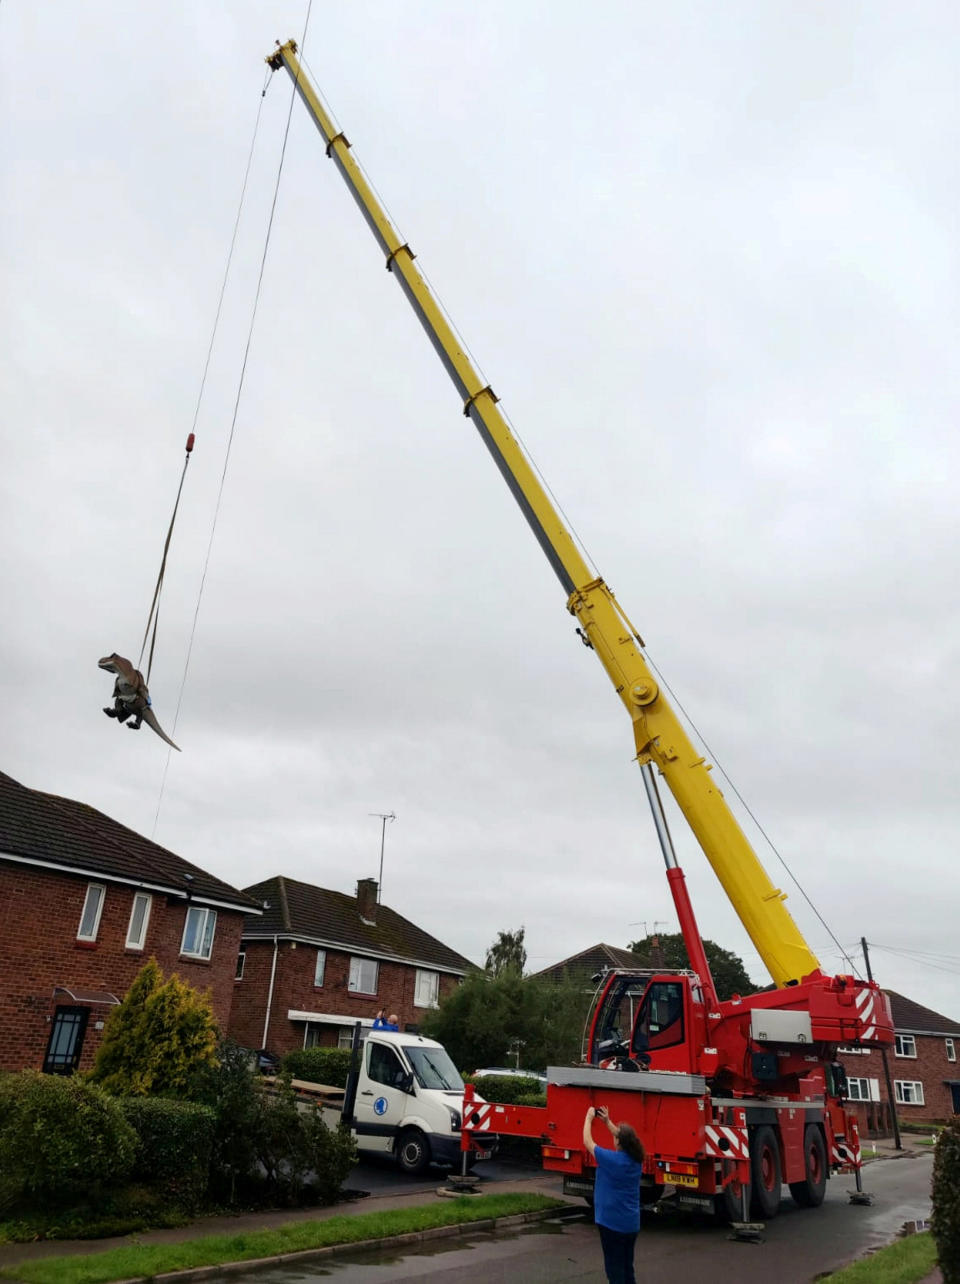 A wacky husband shocked his wife who wanted to brighten up their garden with a gnome - by installing a 12ft-tall replica of a T-REX on the patio. Adrian Shaw, 52, snapped up the 14-stone resin and fiberglass dinosaur and hired a crane to winch it into position on Thursday (3/9). He came up with the madcap-scheme after wife Deborah, 53, begged him to clean up the back garden of their home in Leamington Spa, Warks. The IT analyst paid £1,600 for the replica of the terrifying beast, which he named ‘Dave’ and put it on the patio.